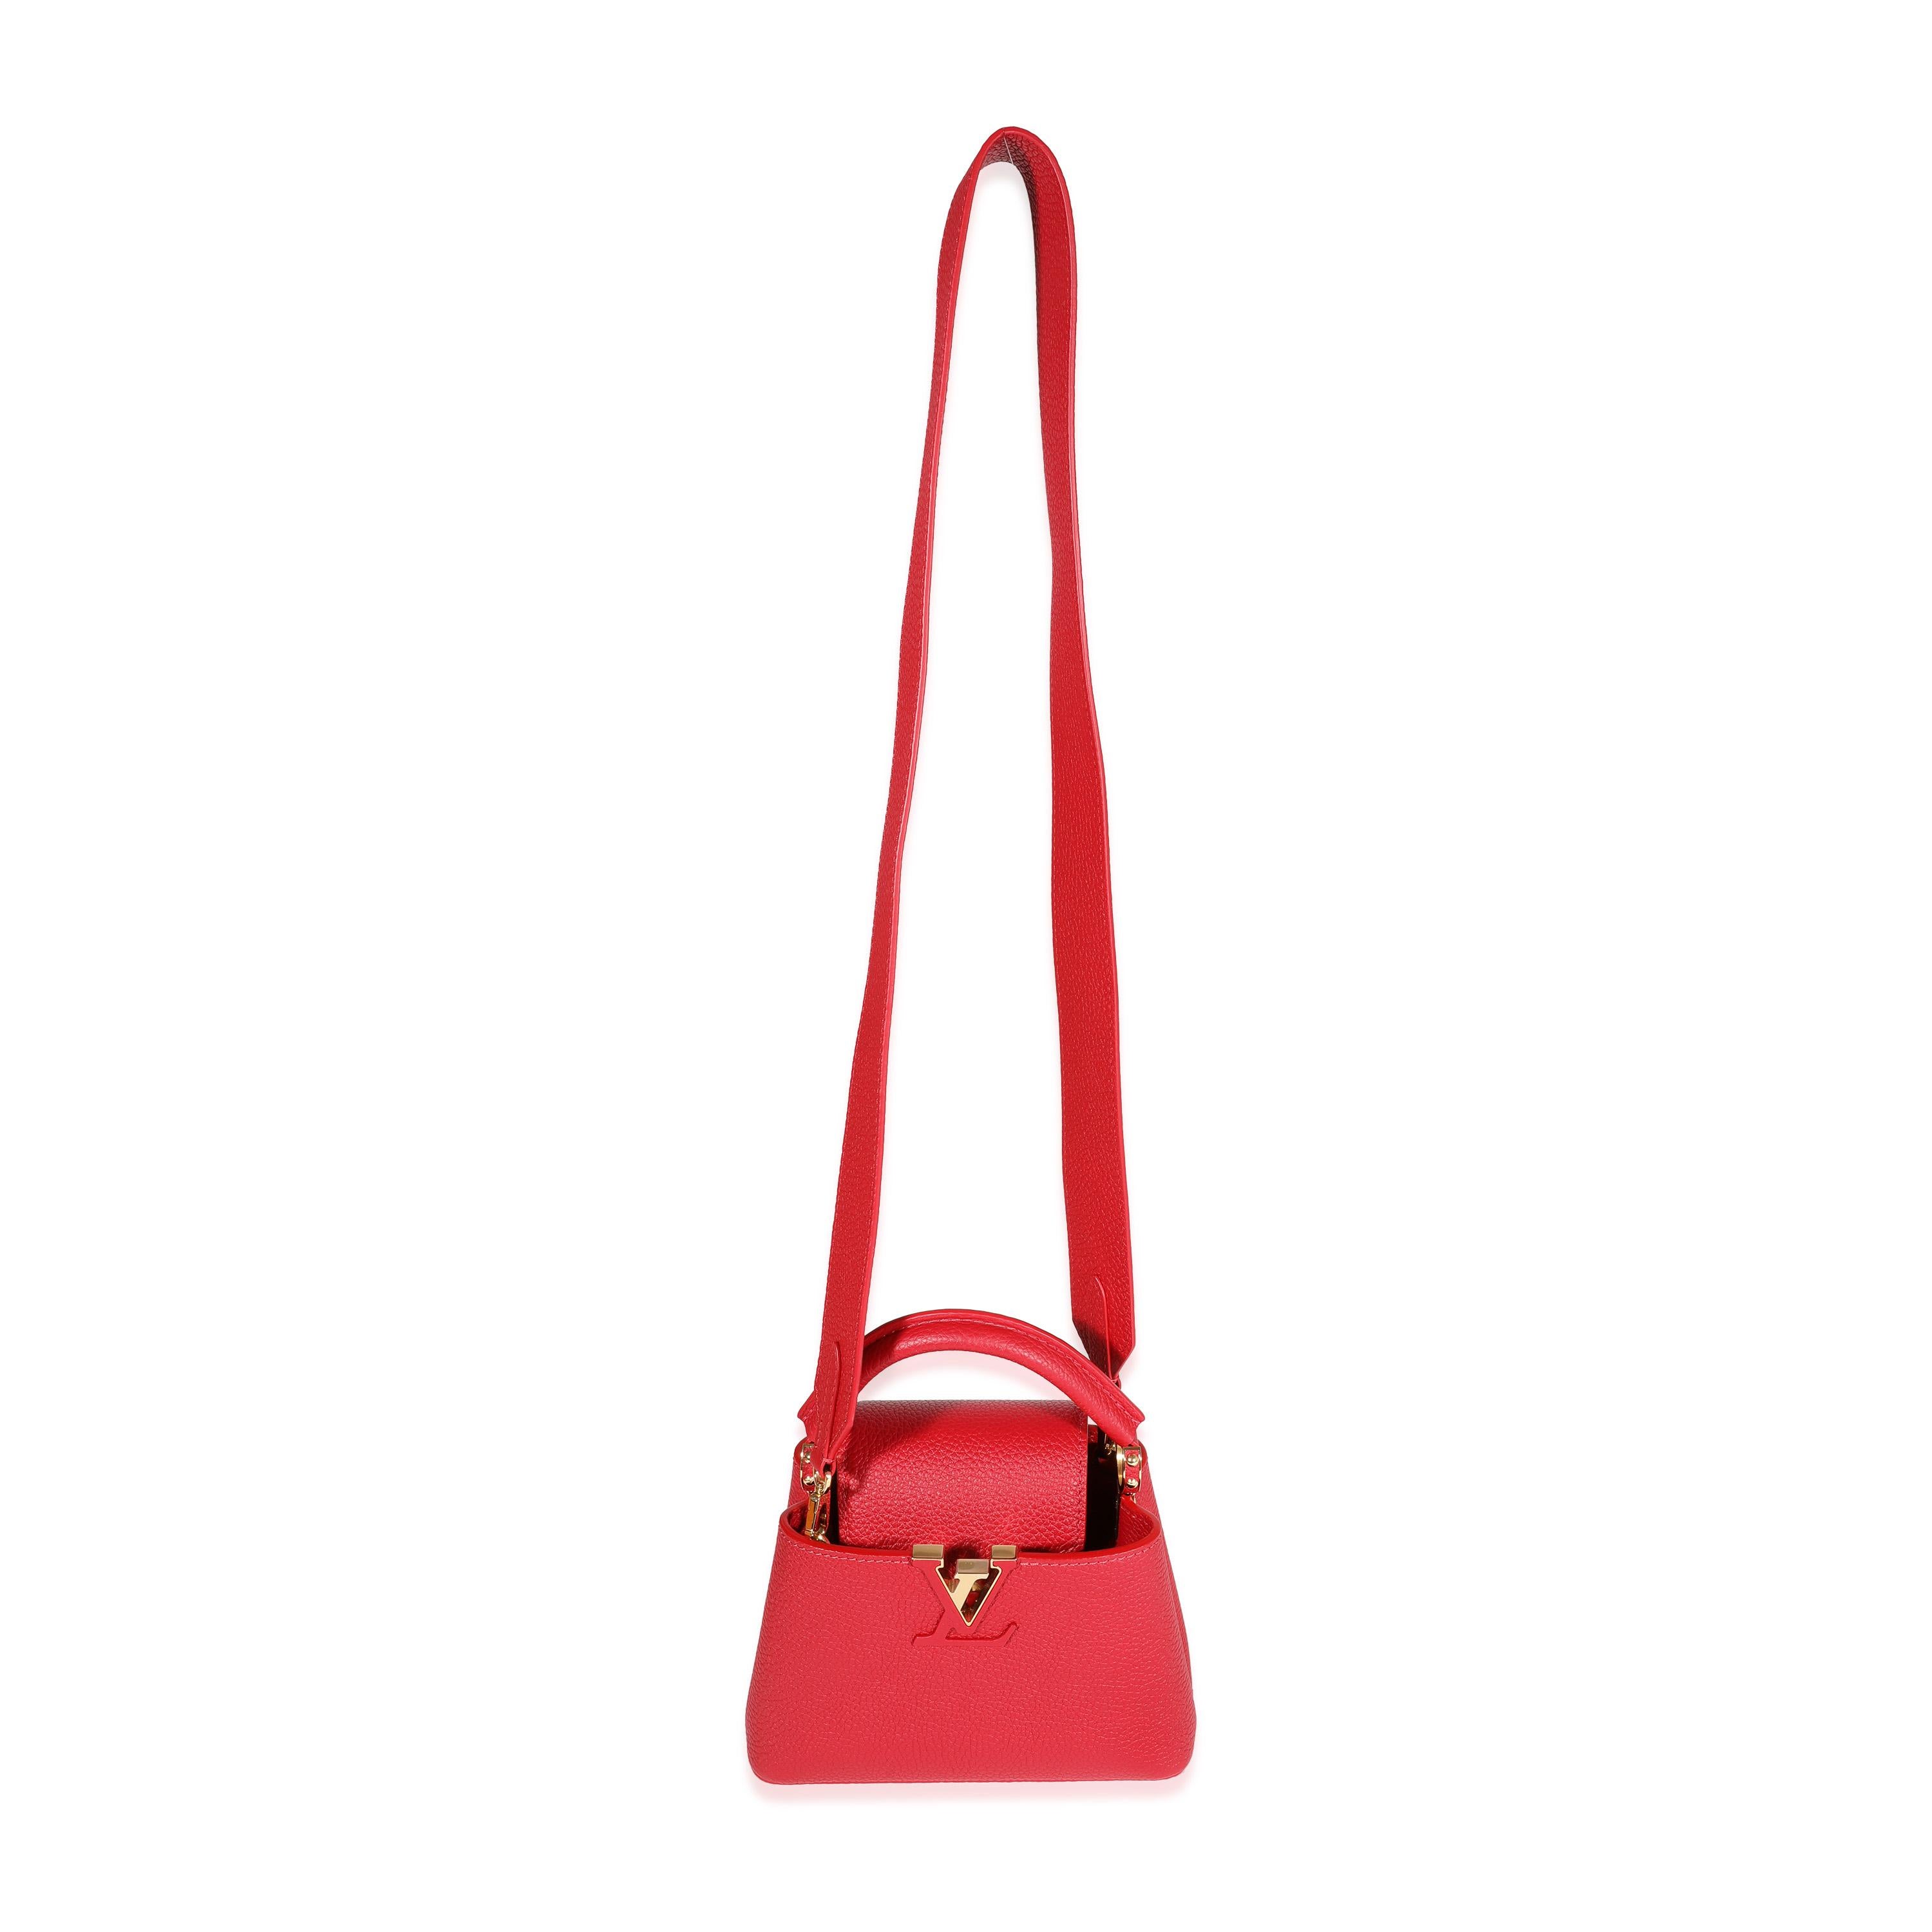 Listing Title: Louis Vuitton Scarlet Taurillon Capucines Mini
SKU: 122851
MSRP: 6100.00
Condition: Pre-owned 
Handbag Condition: Excellent
Condition Comments: Excellent Condition. Faint scuff at exterior. Light scratching at hardware. Plastic at